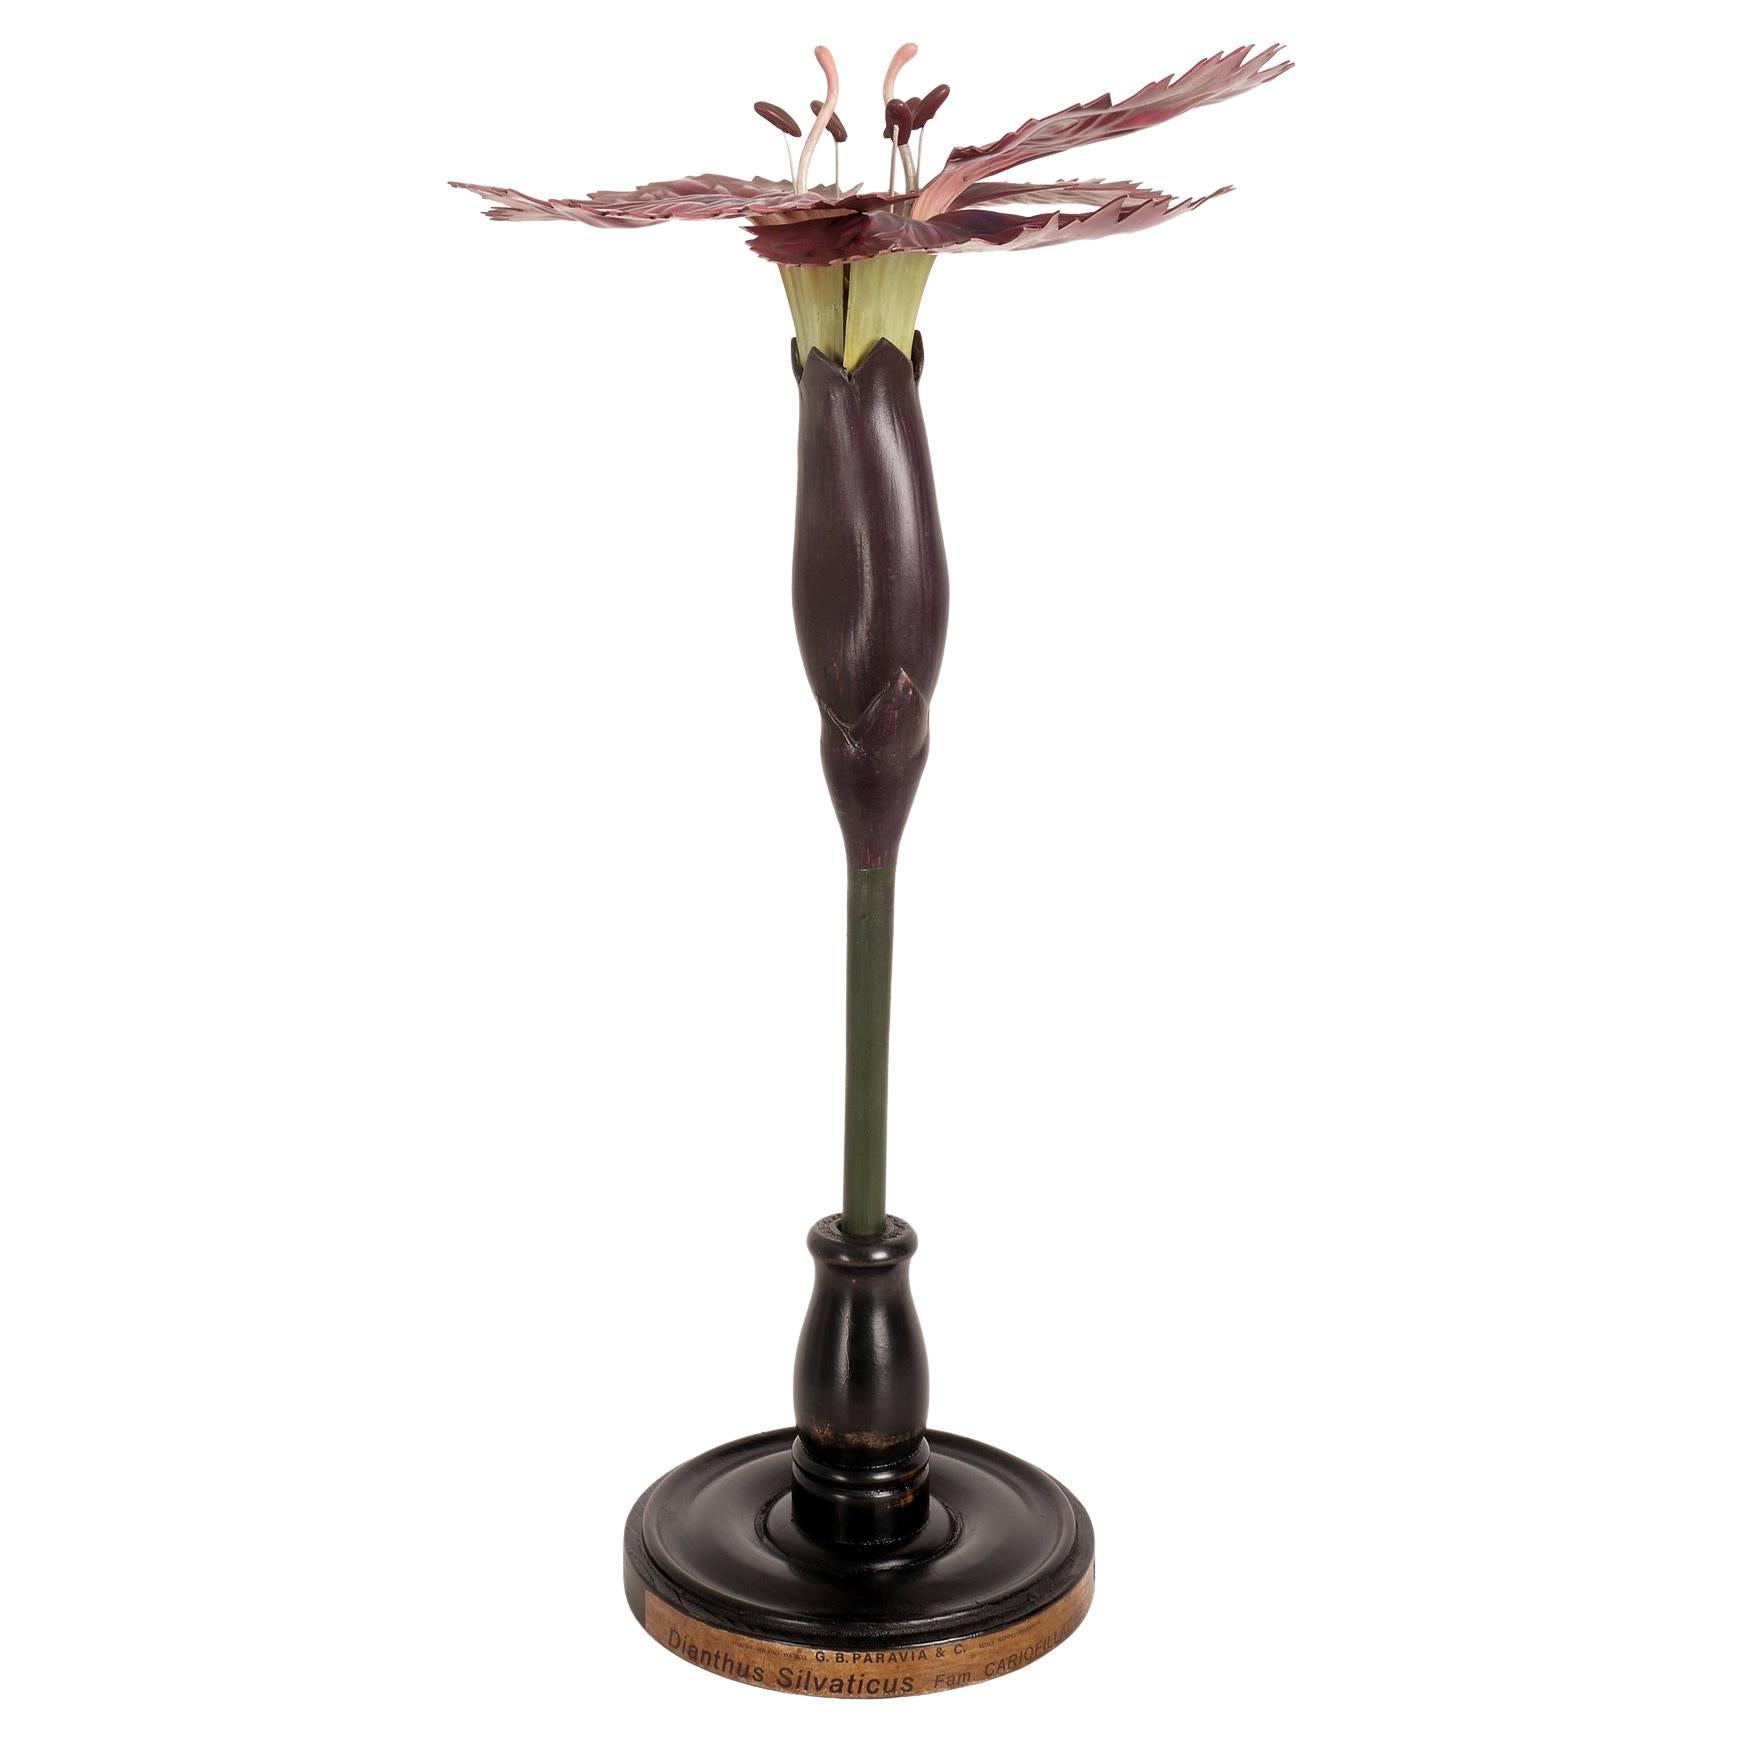 Botanic Model of a Carnation Flower, Paravia Italy, 1940 For Sale